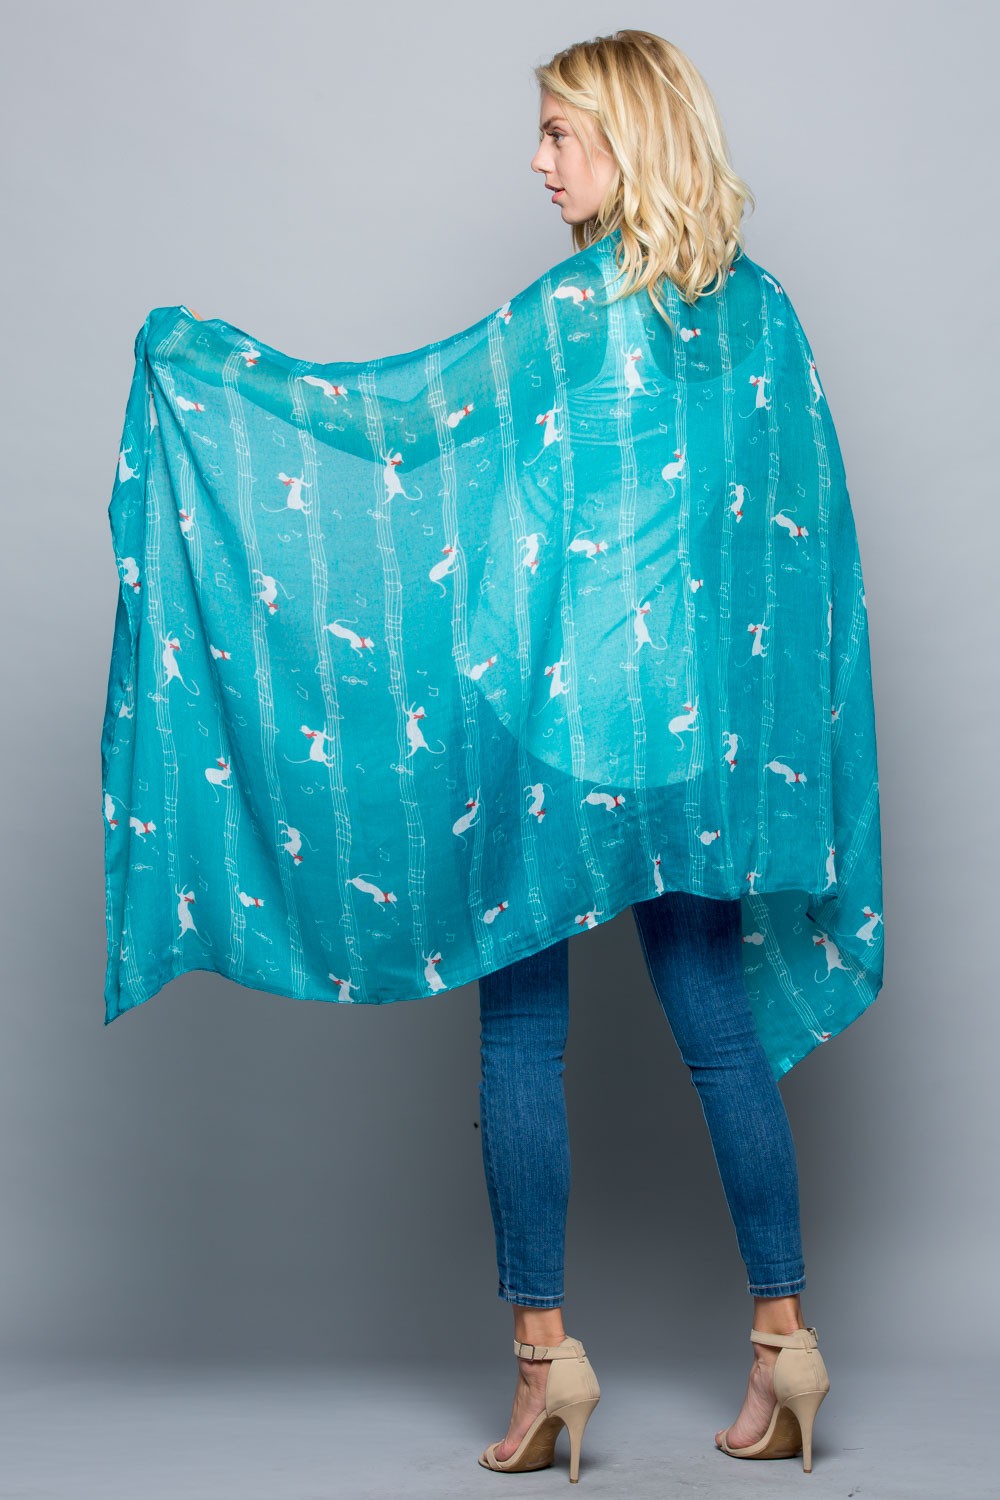 Musical Print Scarf in Teal